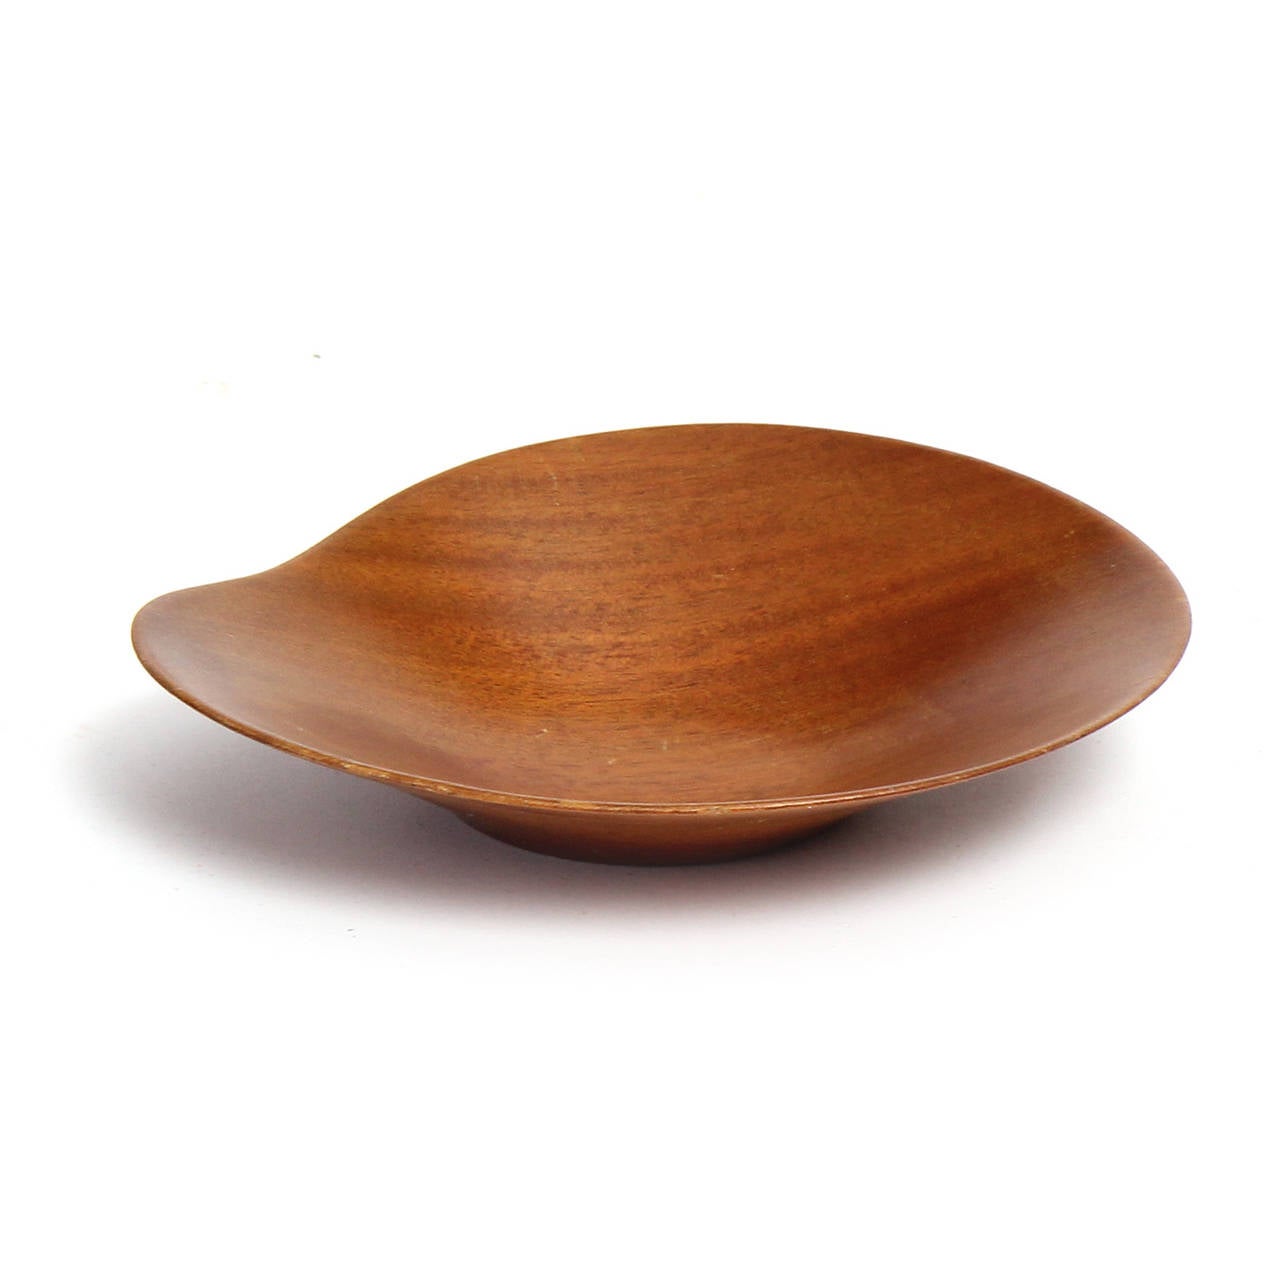 A finely turned thin-walled bowl in mahogany having a flattened oblong organic form with an undulating rim.